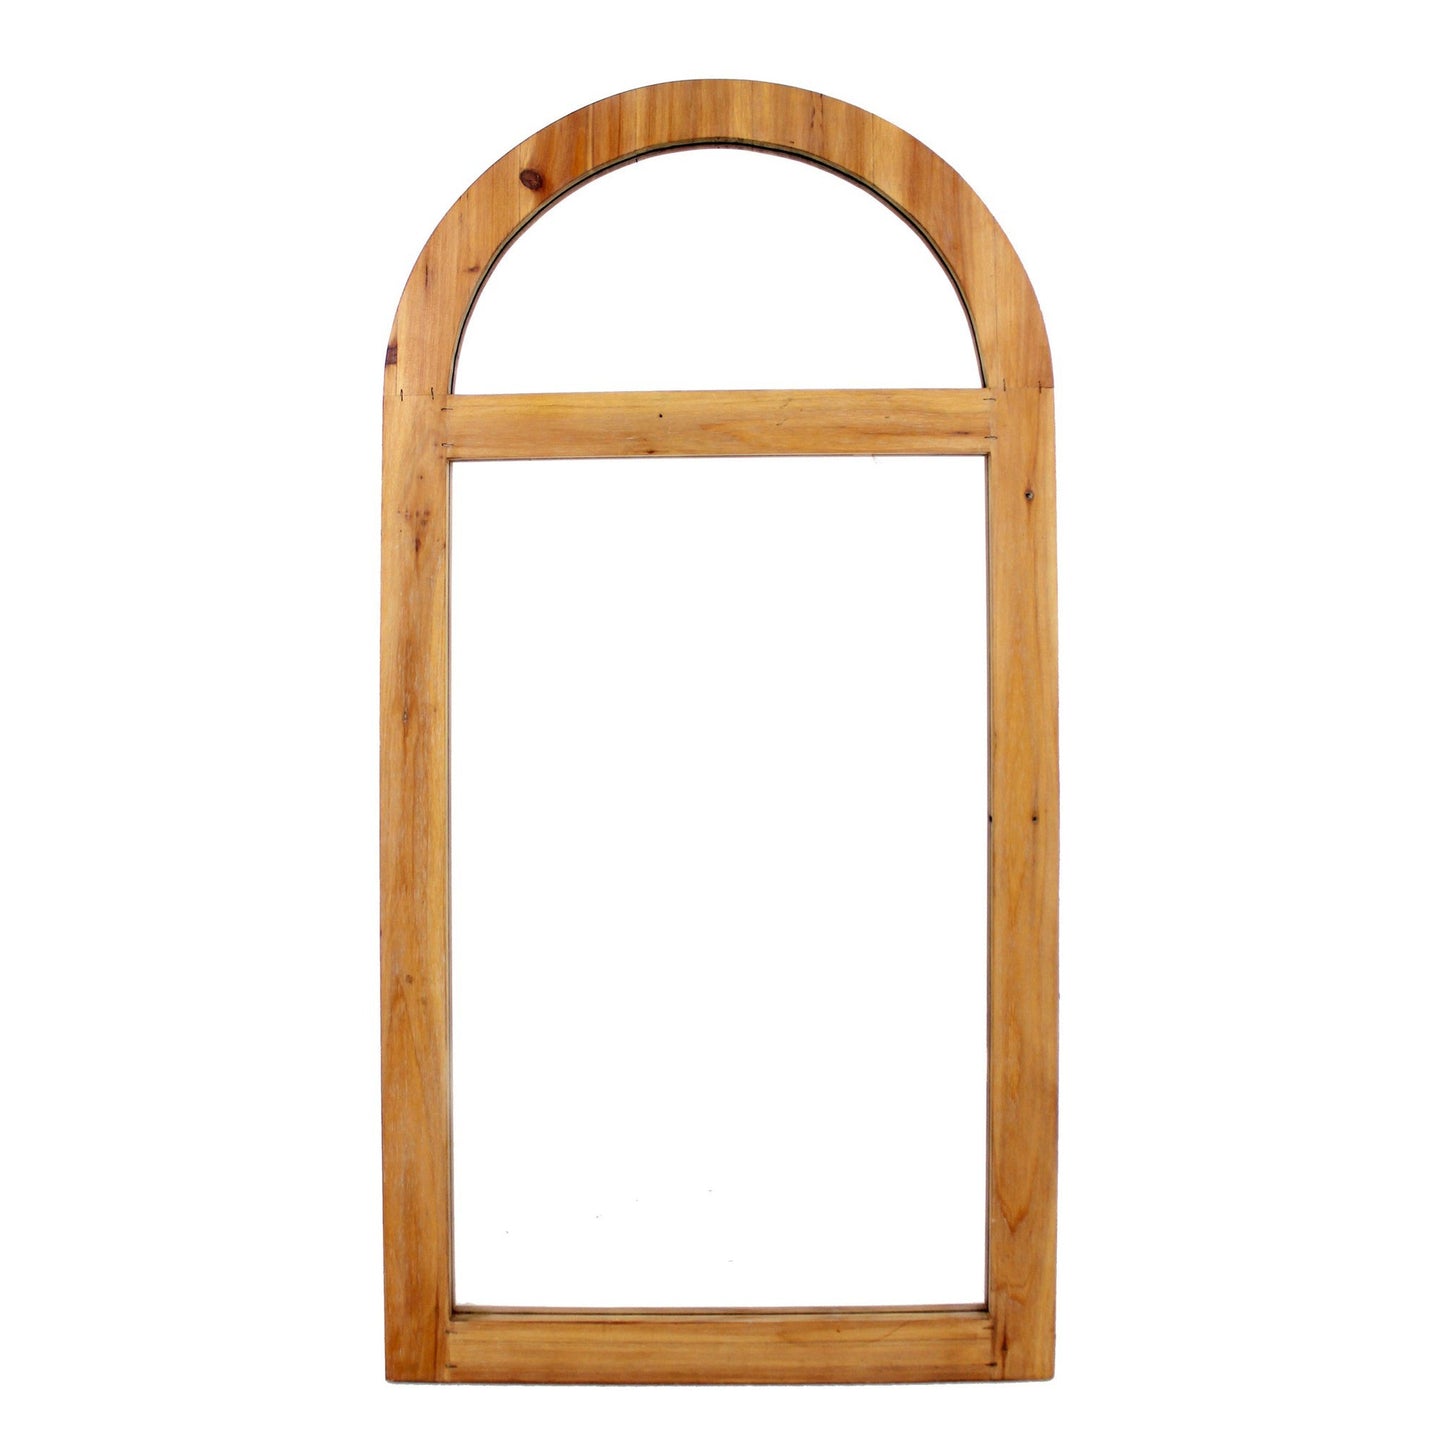 Benzara Brown Farmhouse Style Rectangular Wooden Wall Mirror With Arched Top